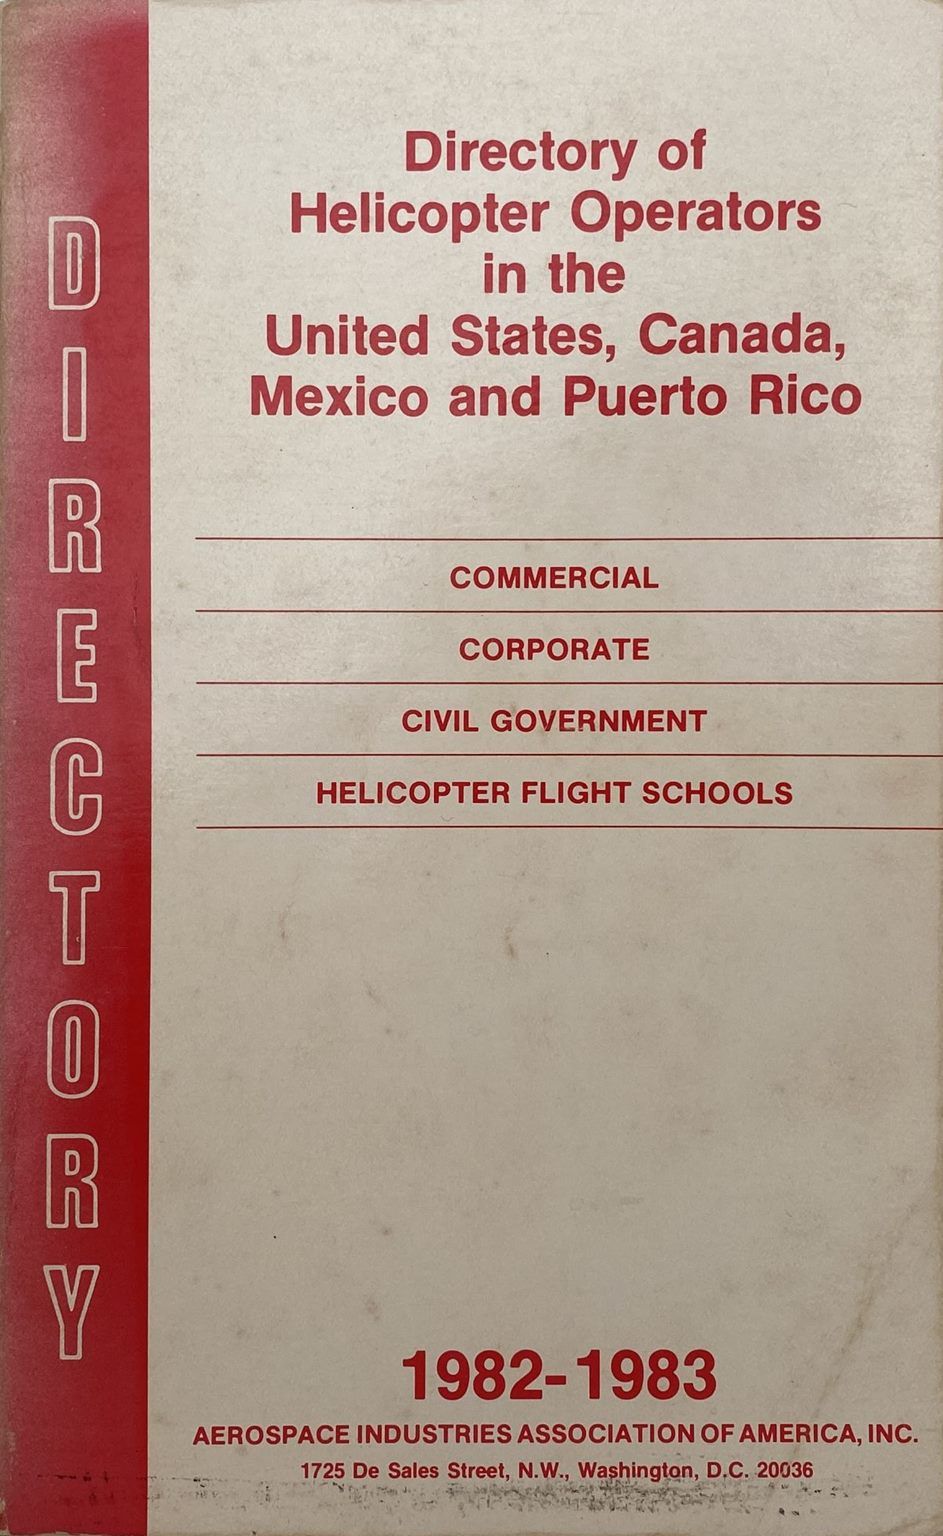 DIRECTORY OF HELICOPTER OPERATORS in the USA, Canada, Mexico, Puerto Rico 1982